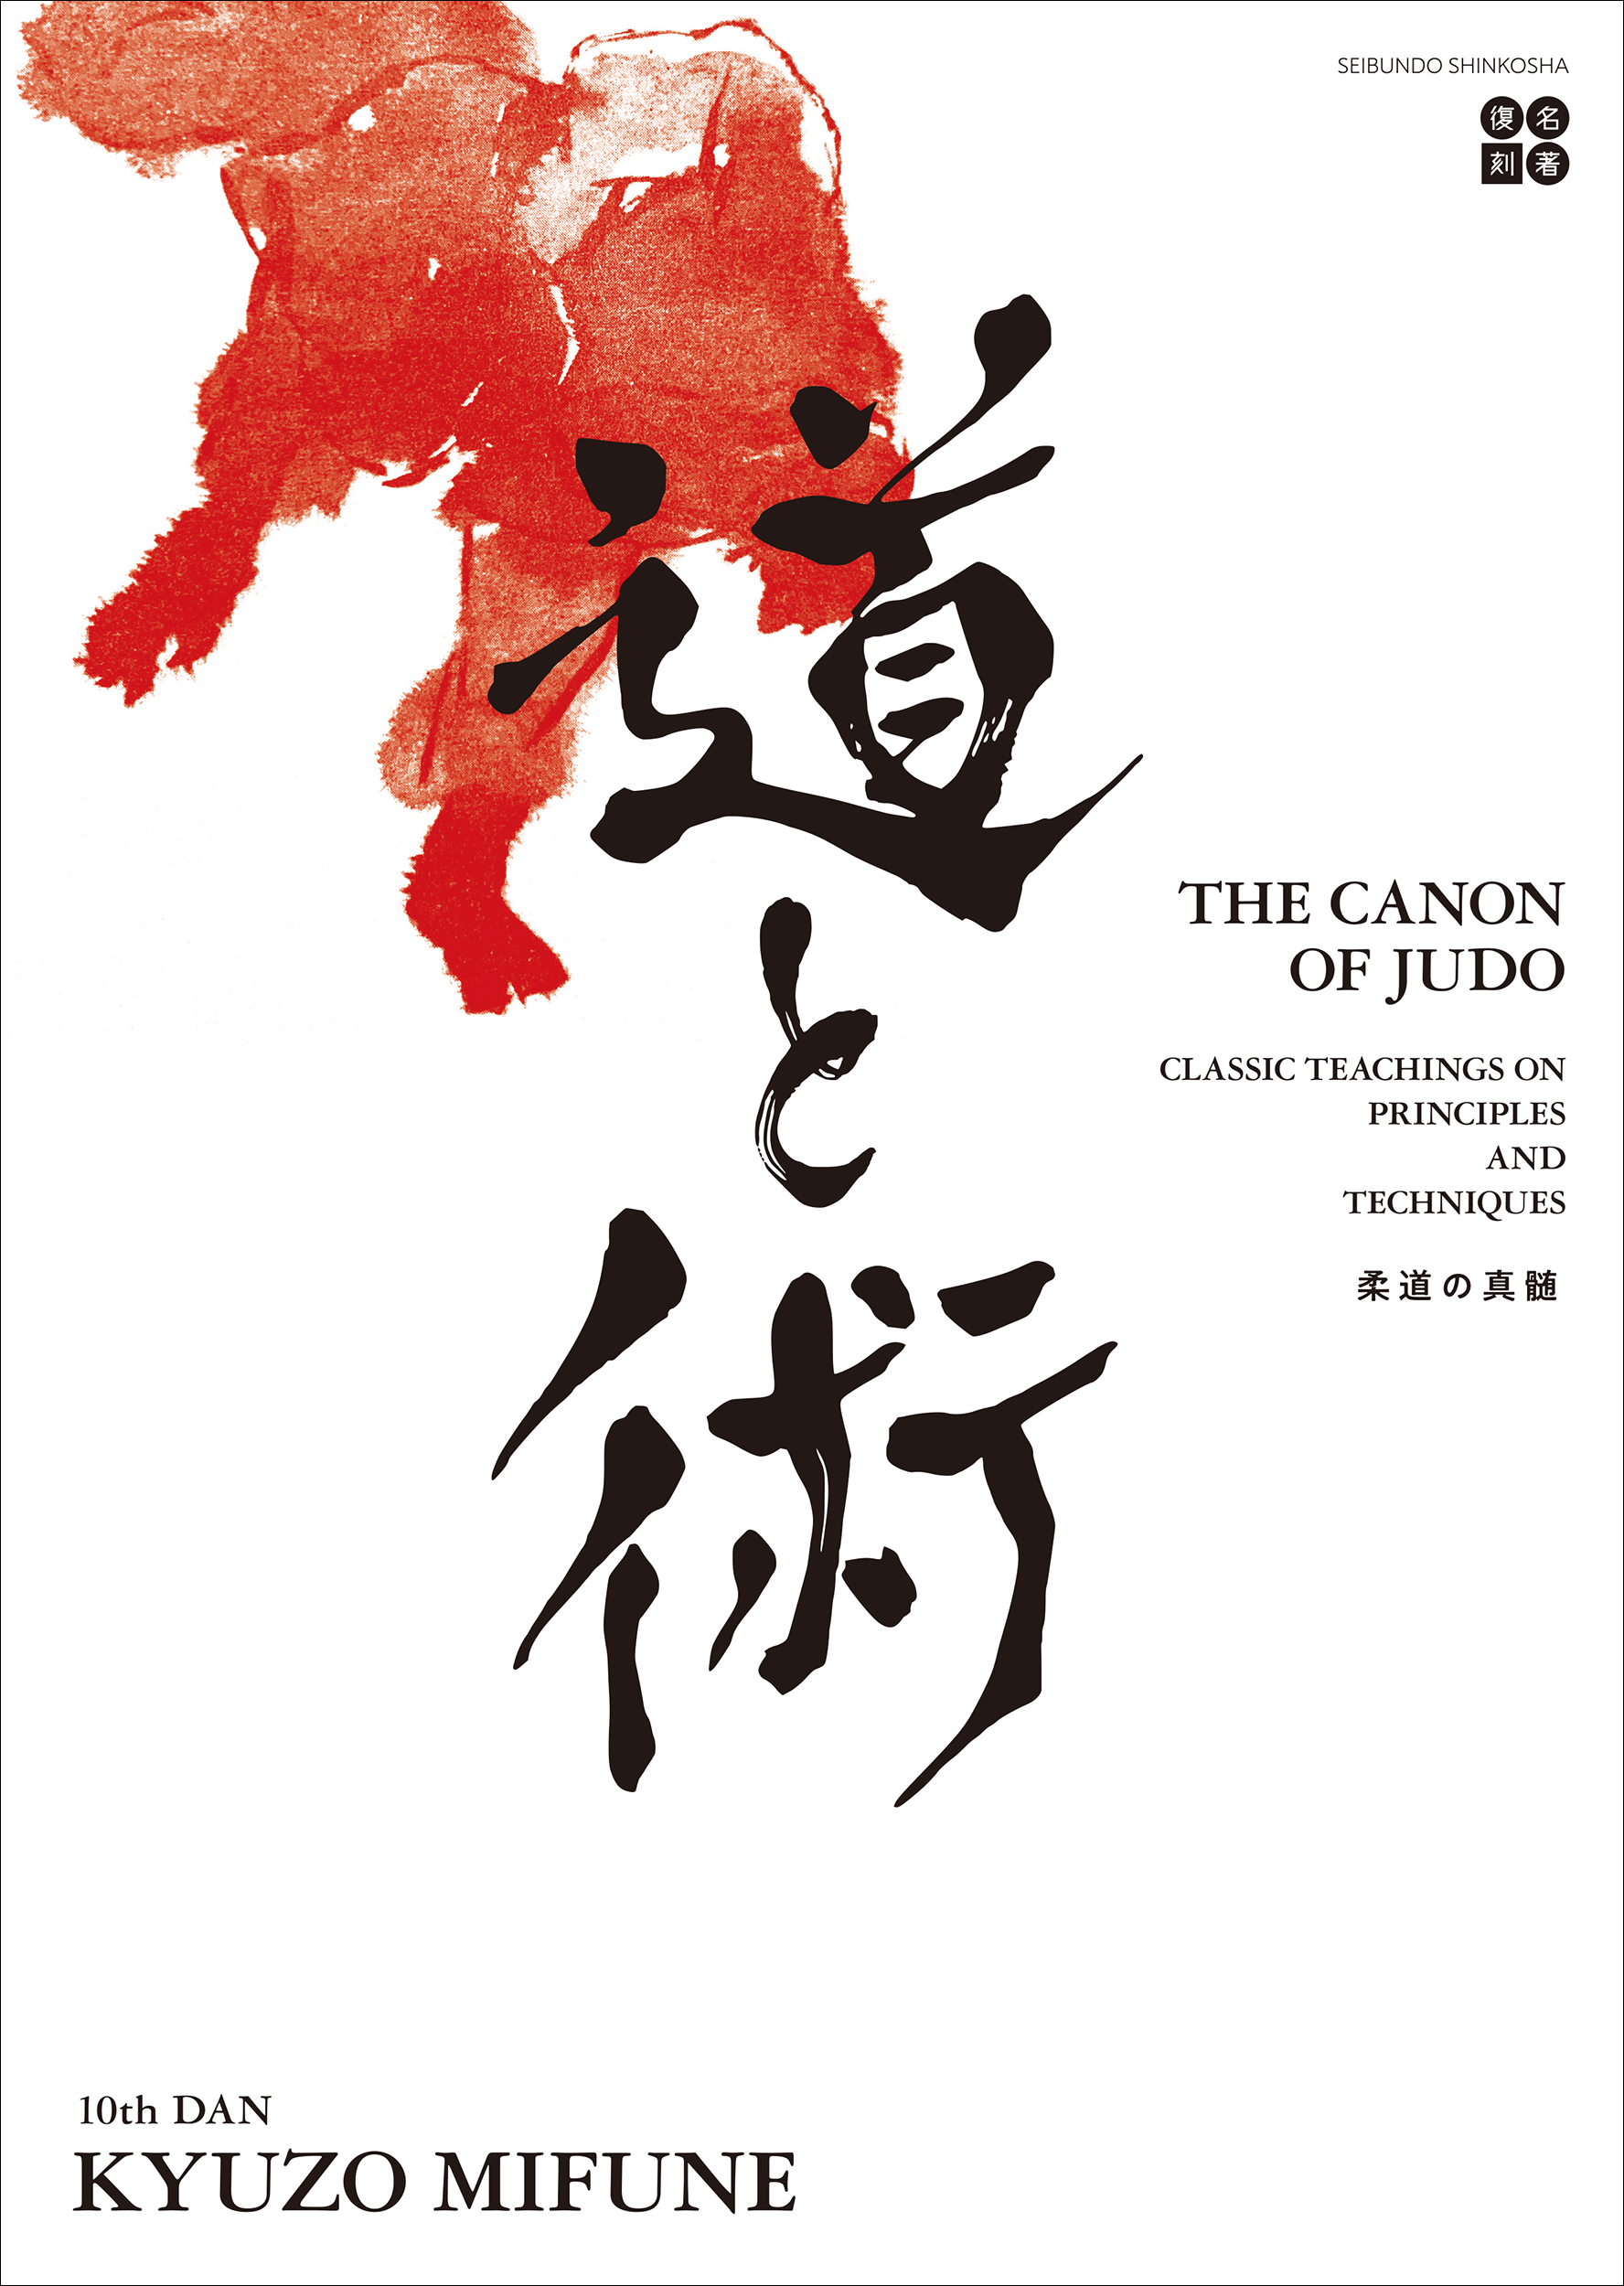 The Canon of Judo —Classic Teachings on Principles and Techniquesの商品画像